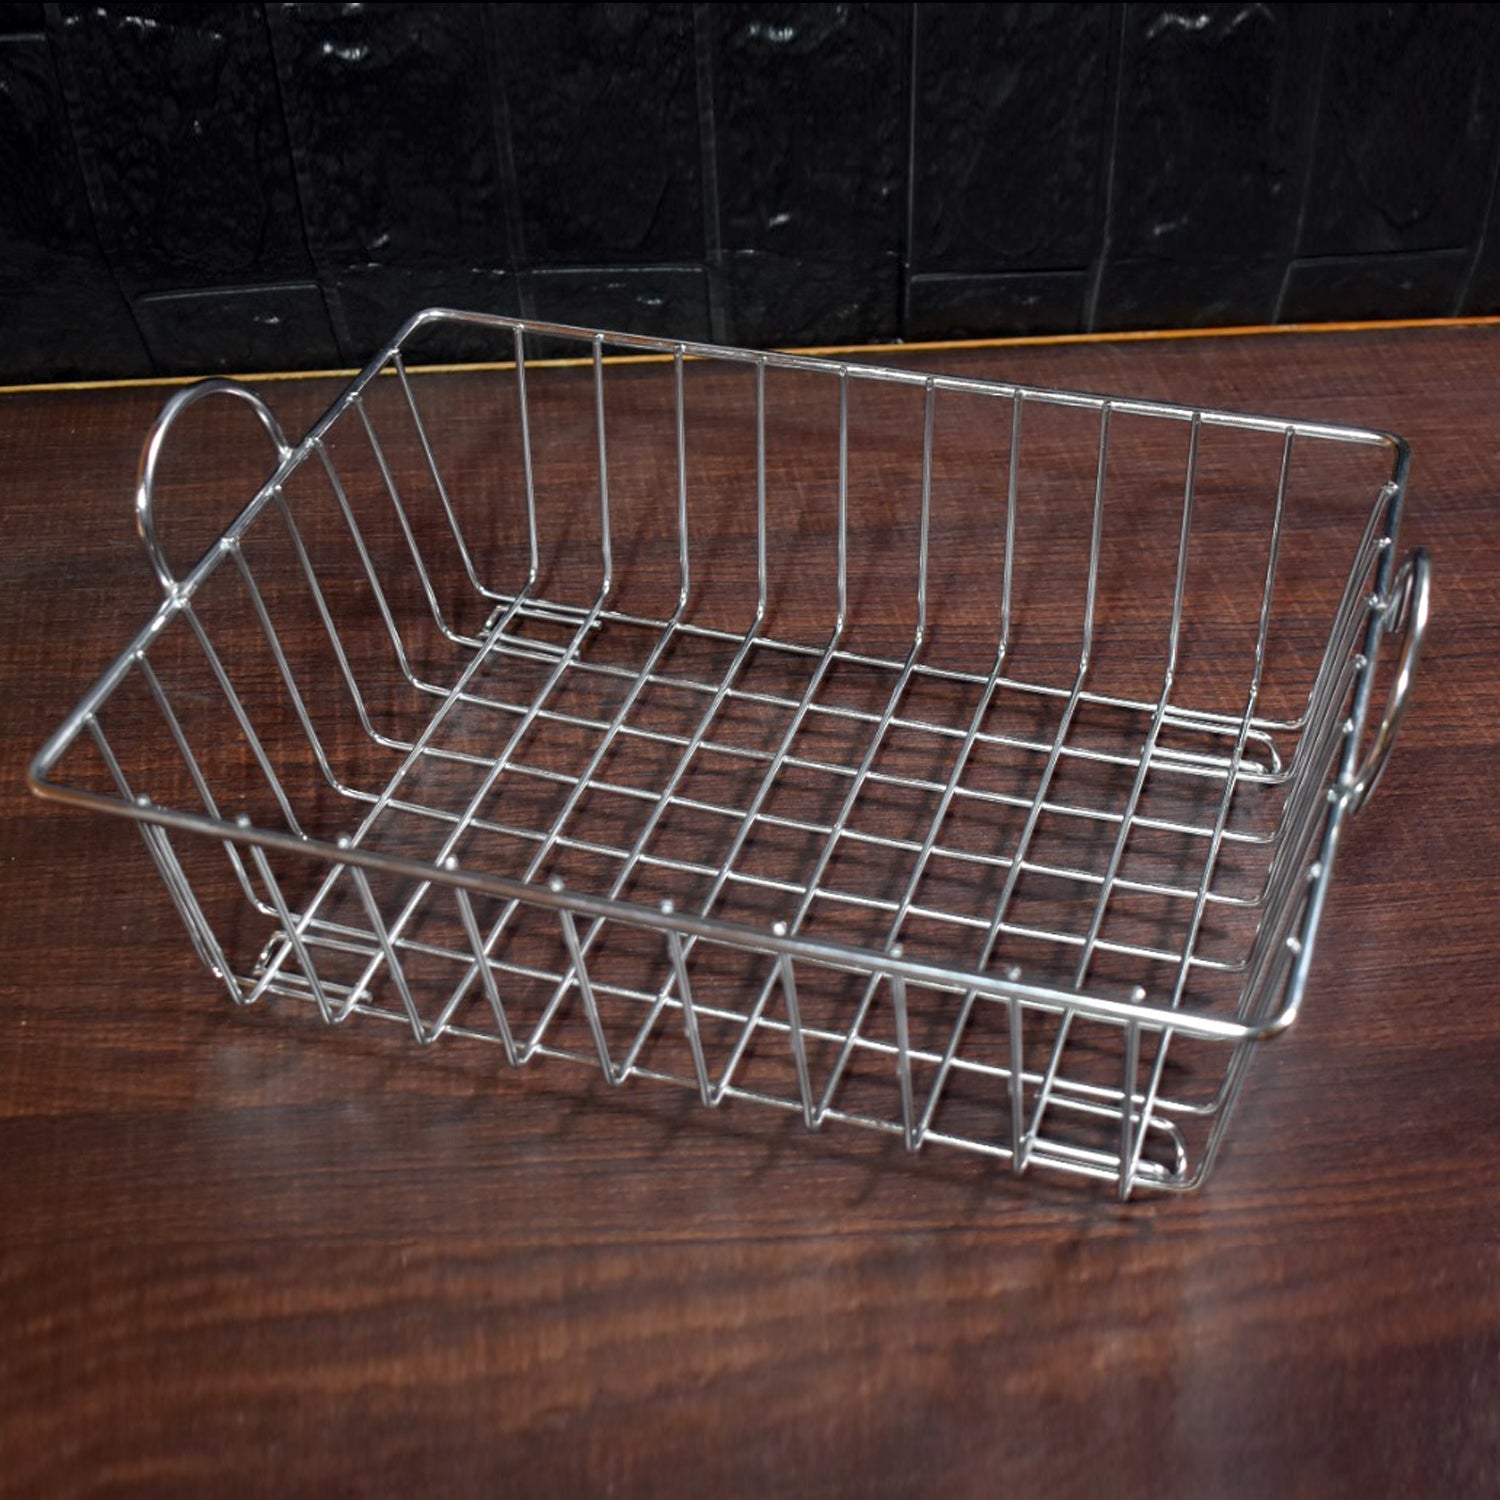 2743 SS Square Basket Stand used for holding fruits as a decorative and using purposes in all kinds of official and household places etc.